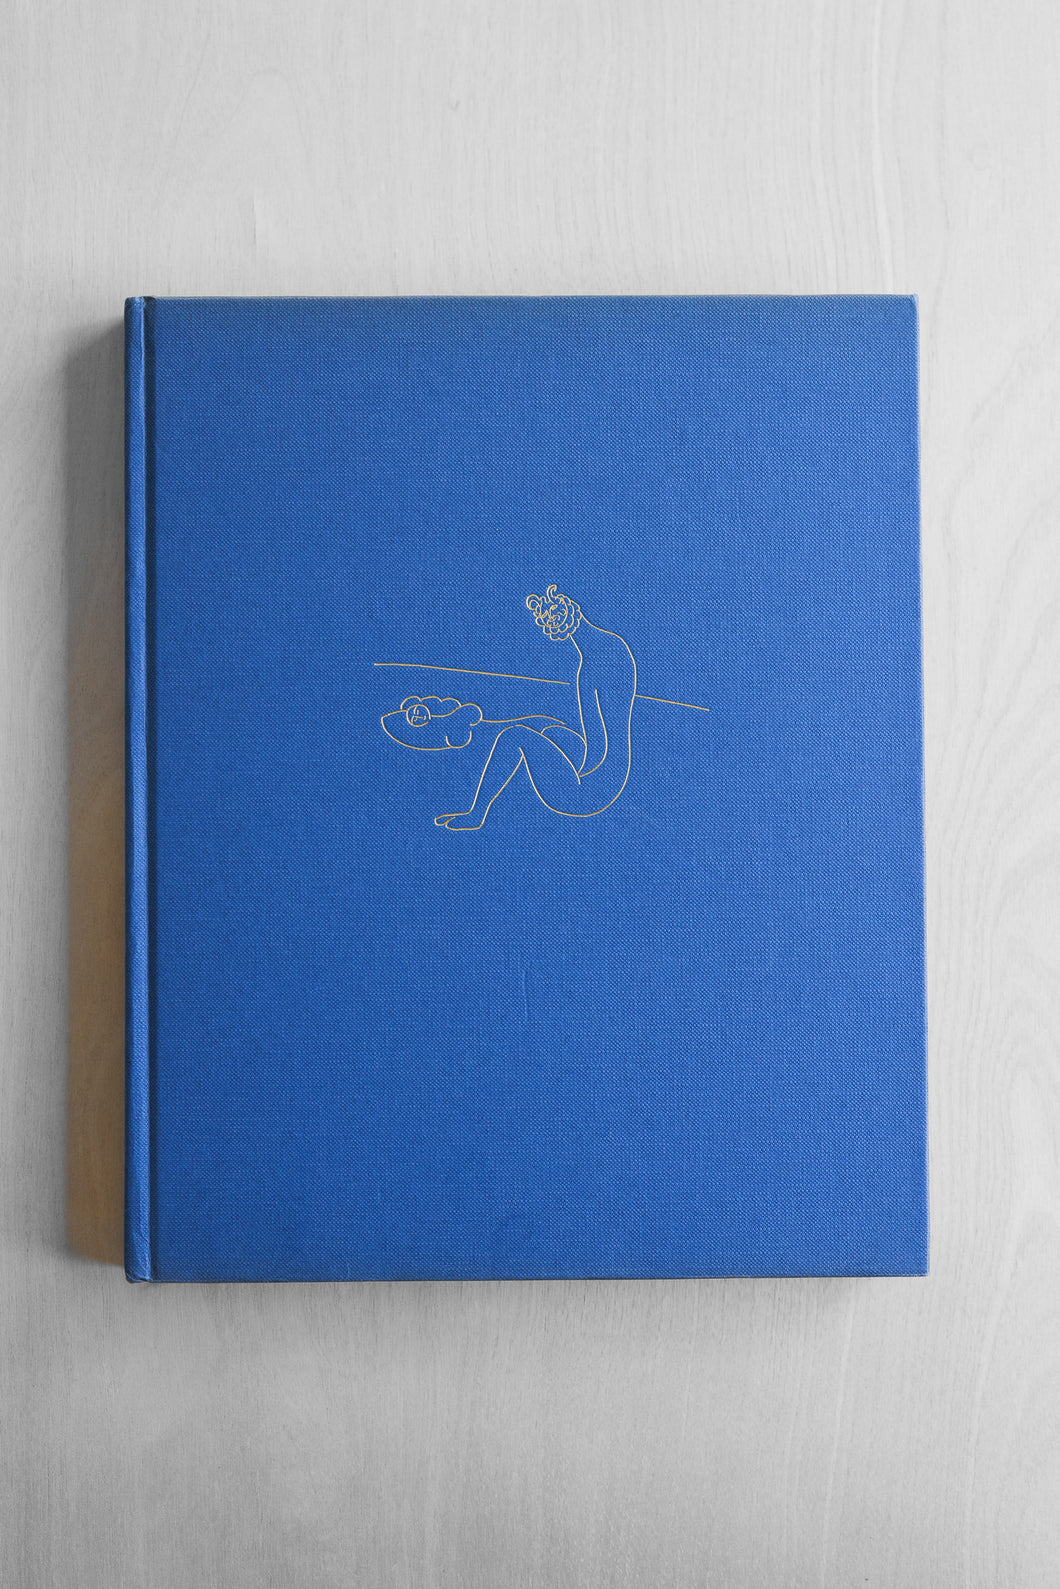 Pablo Picasso Hard Cover Coffee Table Book